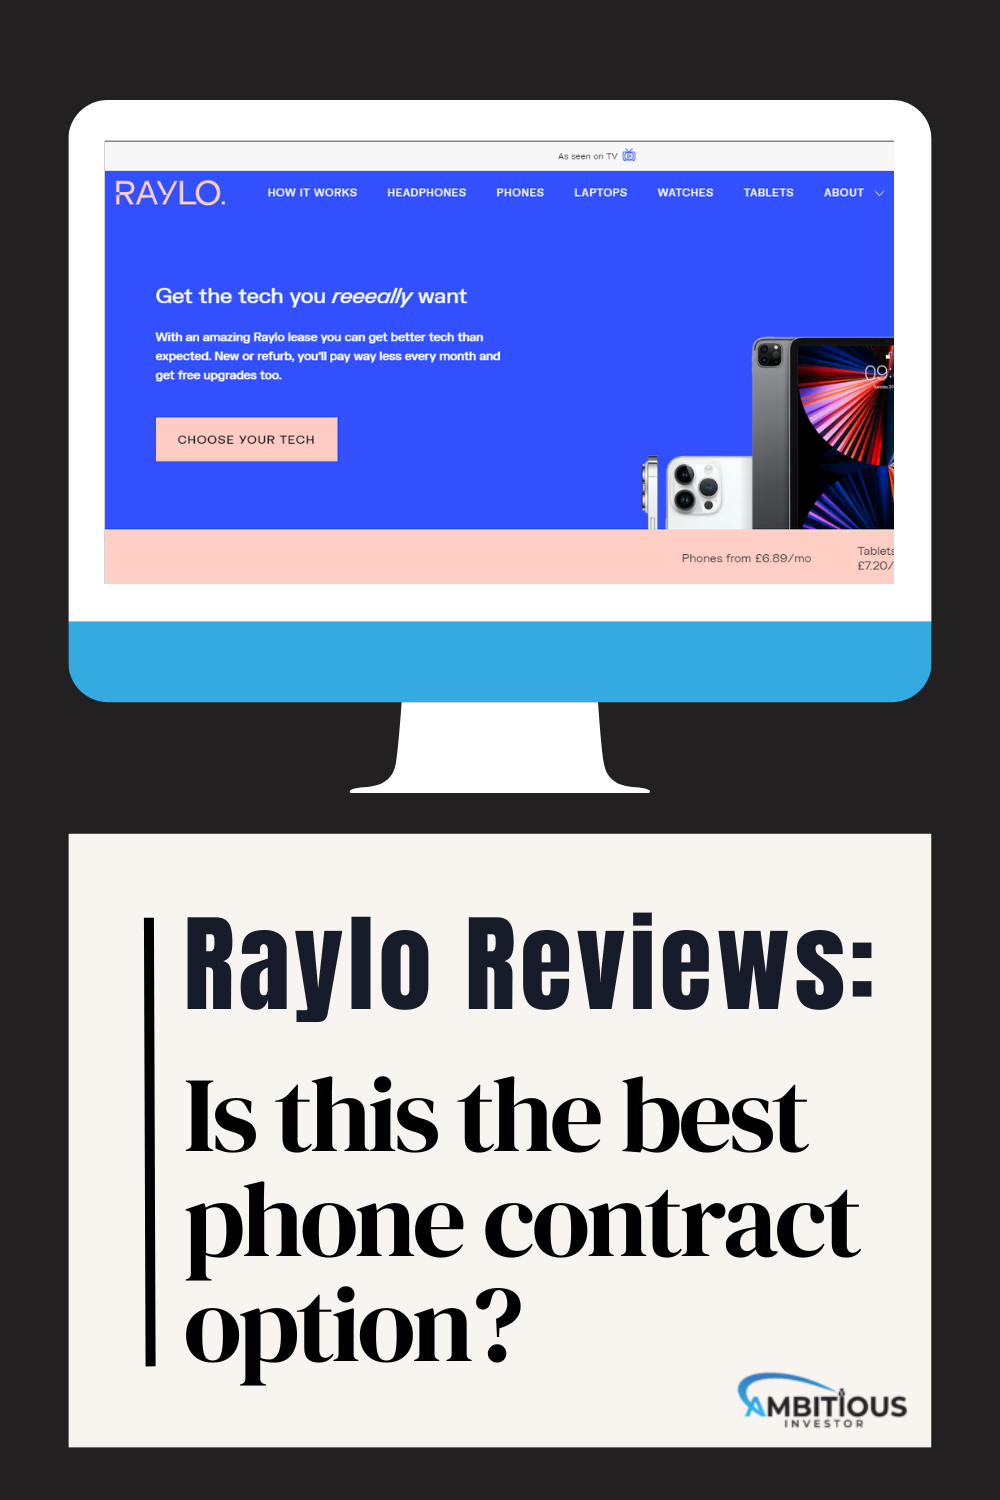 Raylo Reviews – Is this the best phone contract option?